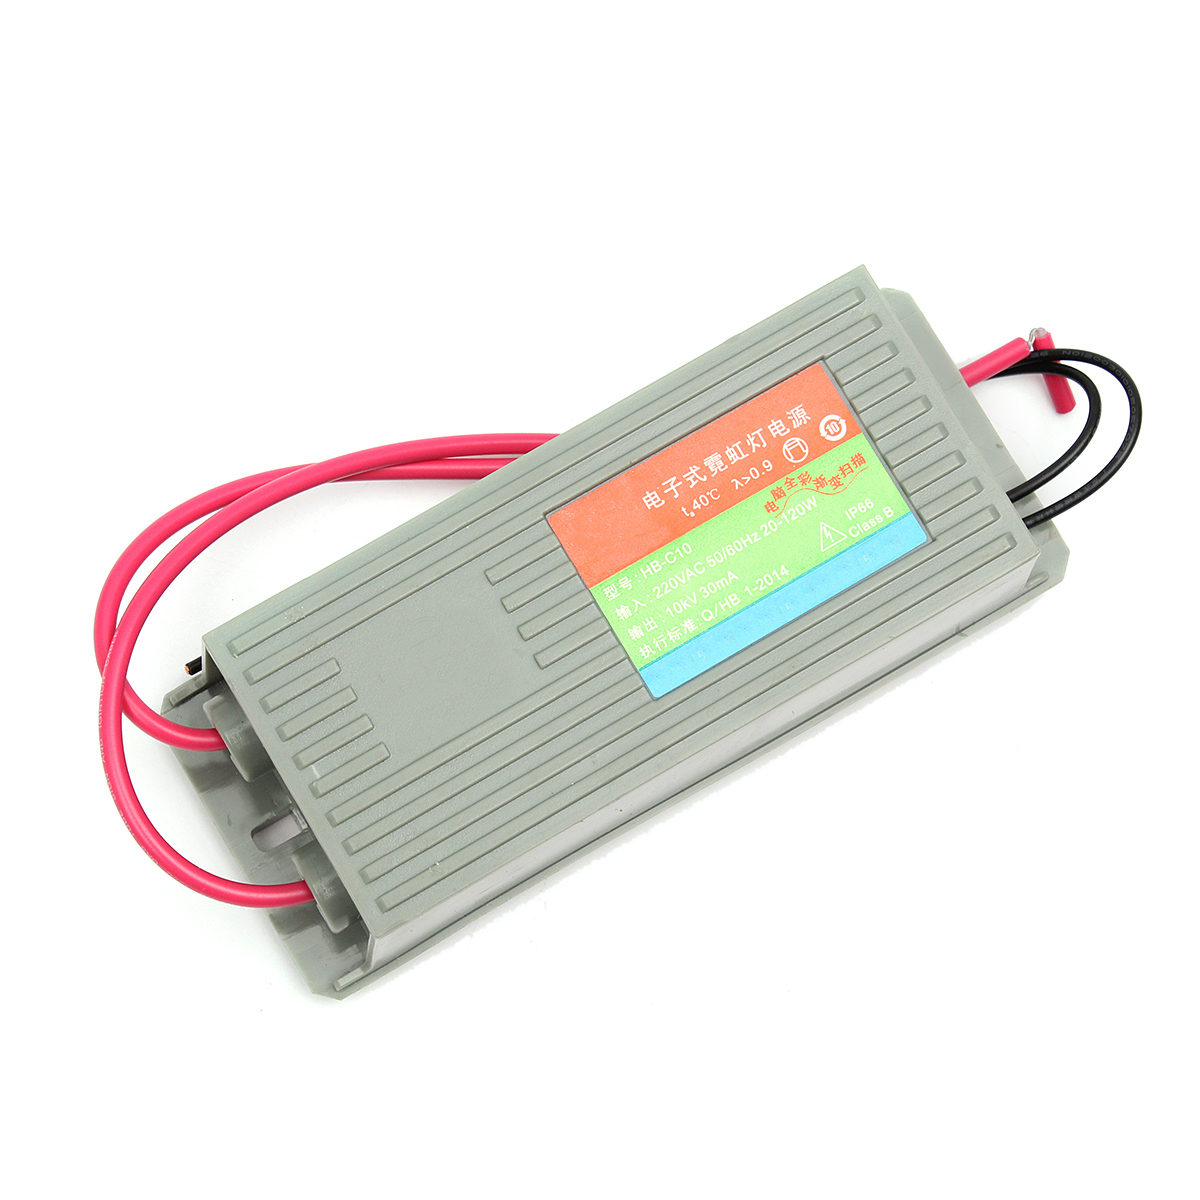 

10KV 30MA HB-C10 Neon Electronic Transformer Load Neon Power Supply Rectifier Driver